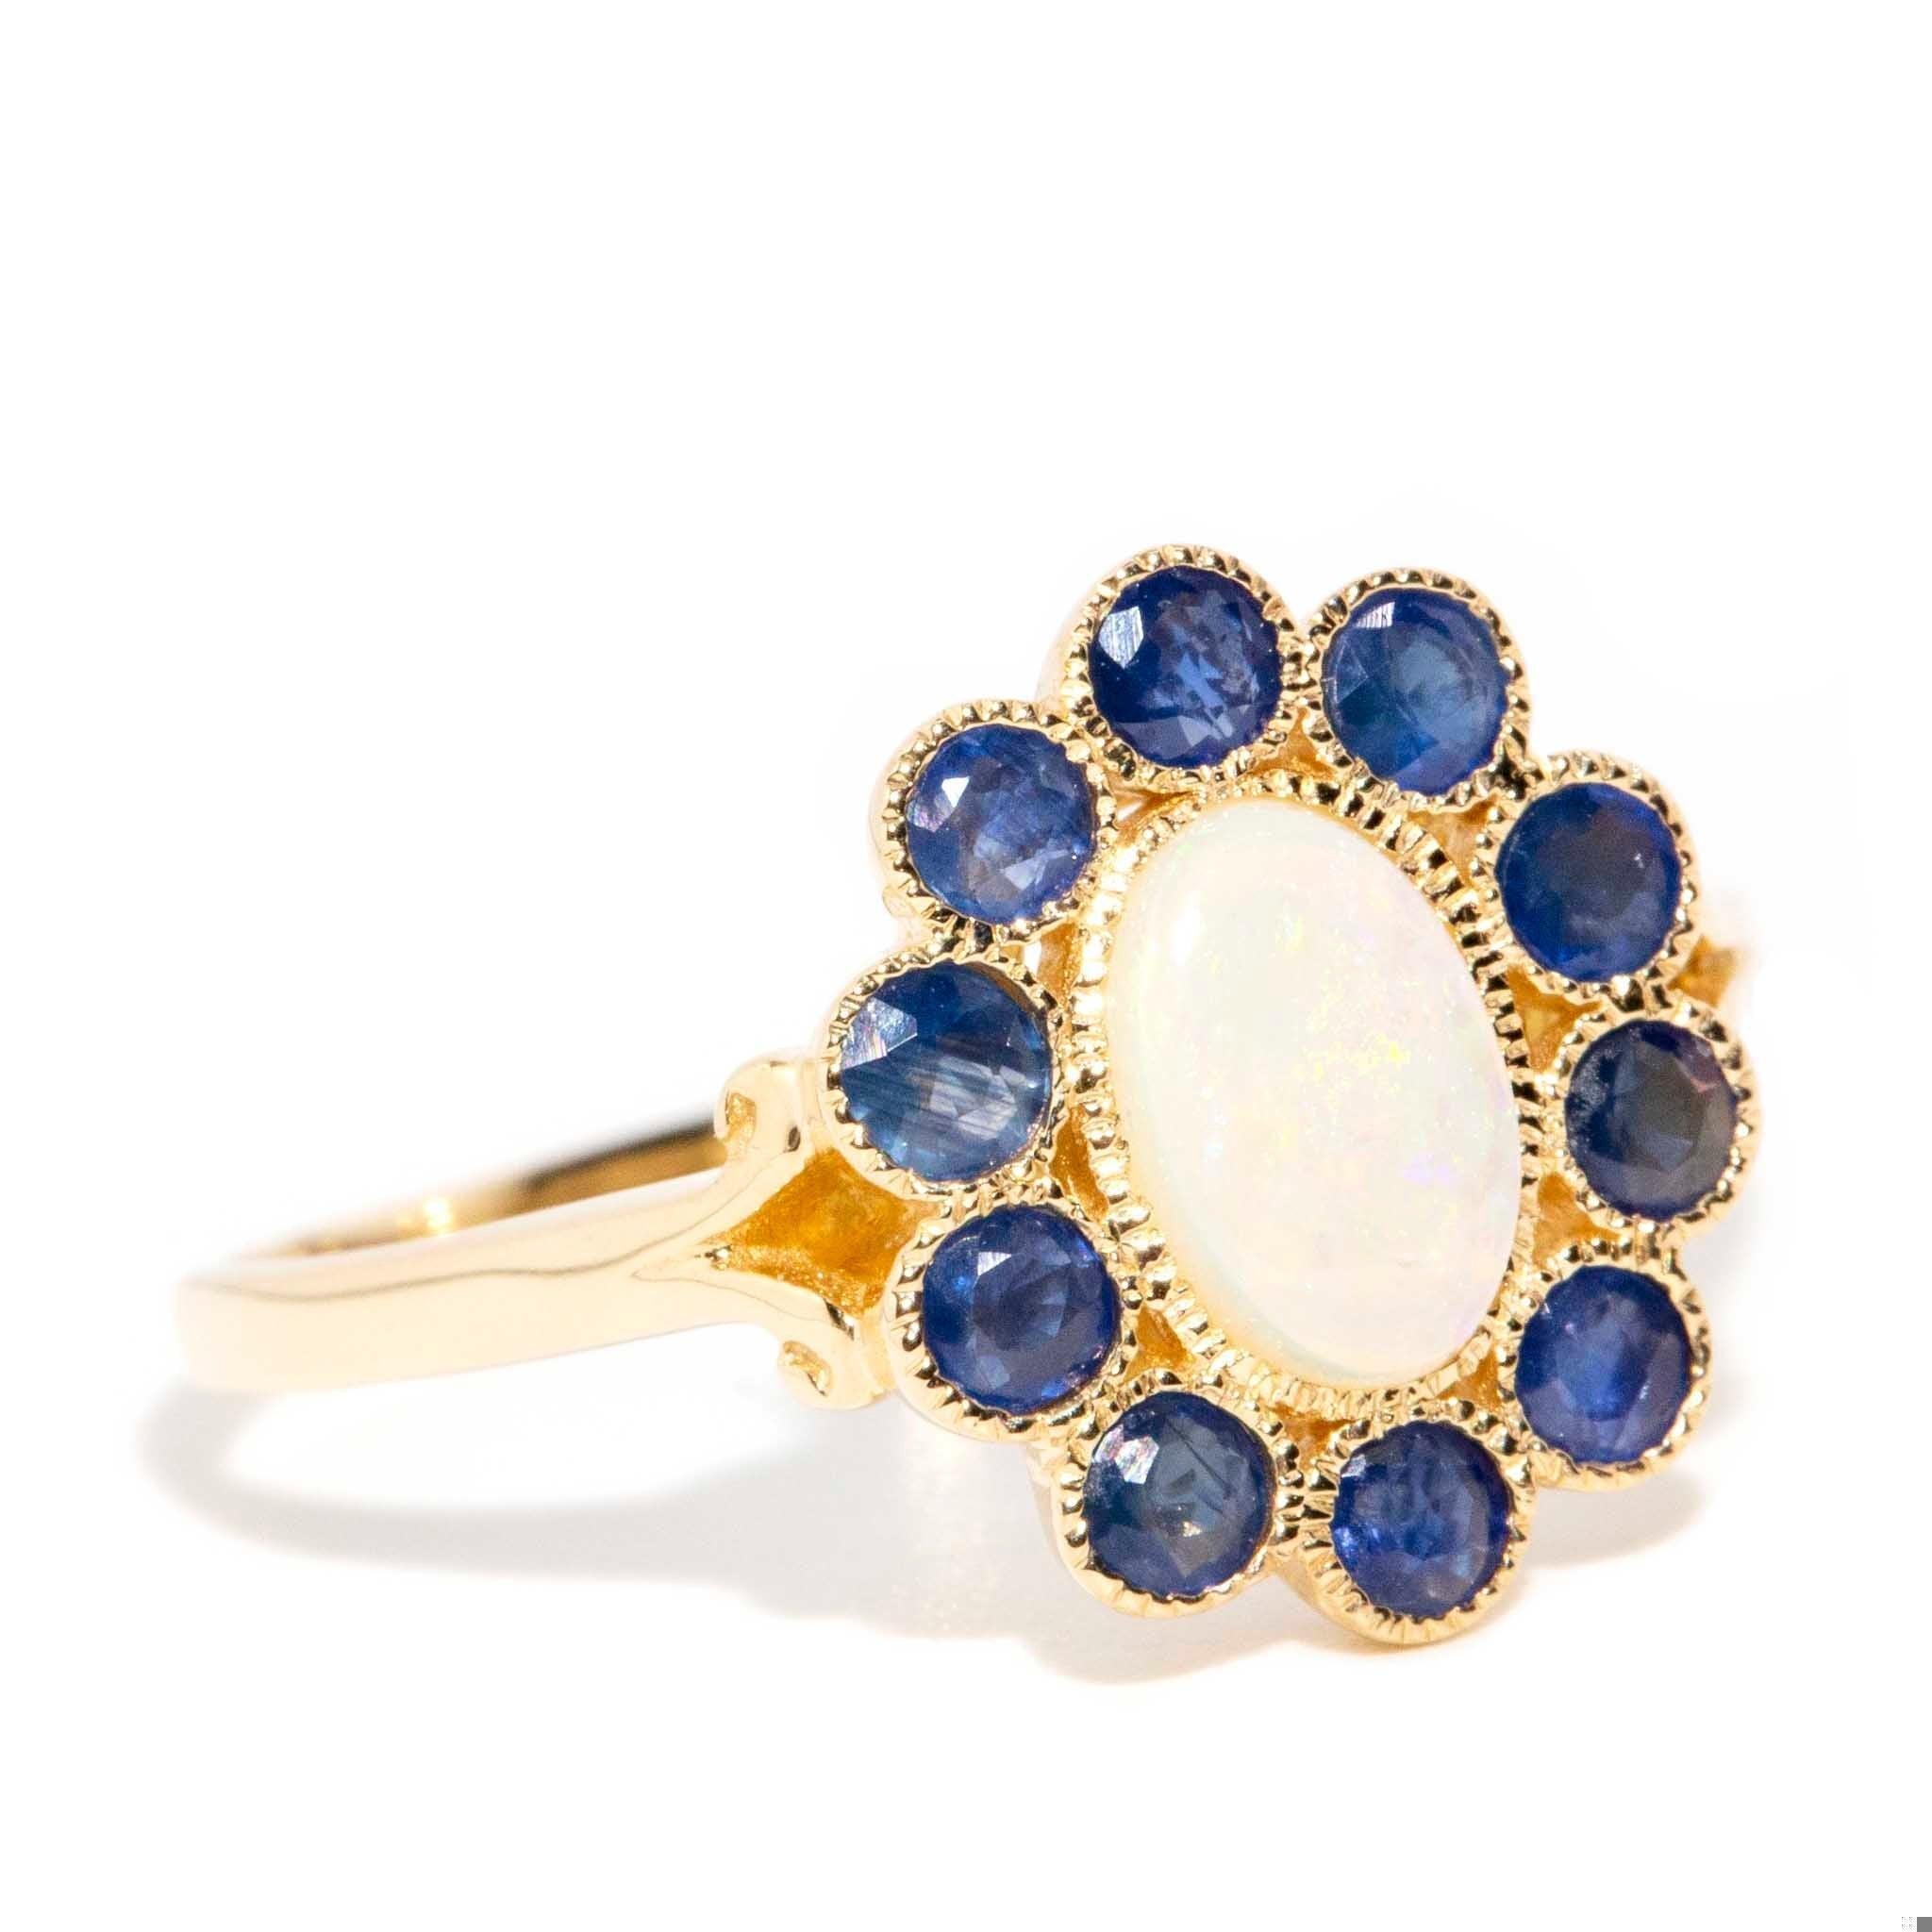 With her stunning opal framed in rich blue sapphires, The Carole Ring is a nod to a glamorous past. Influenced by an era when technicolour reigned in all its vivid glory, she is a must have for todays screen siren.

The Carole Ring Gem Details
The